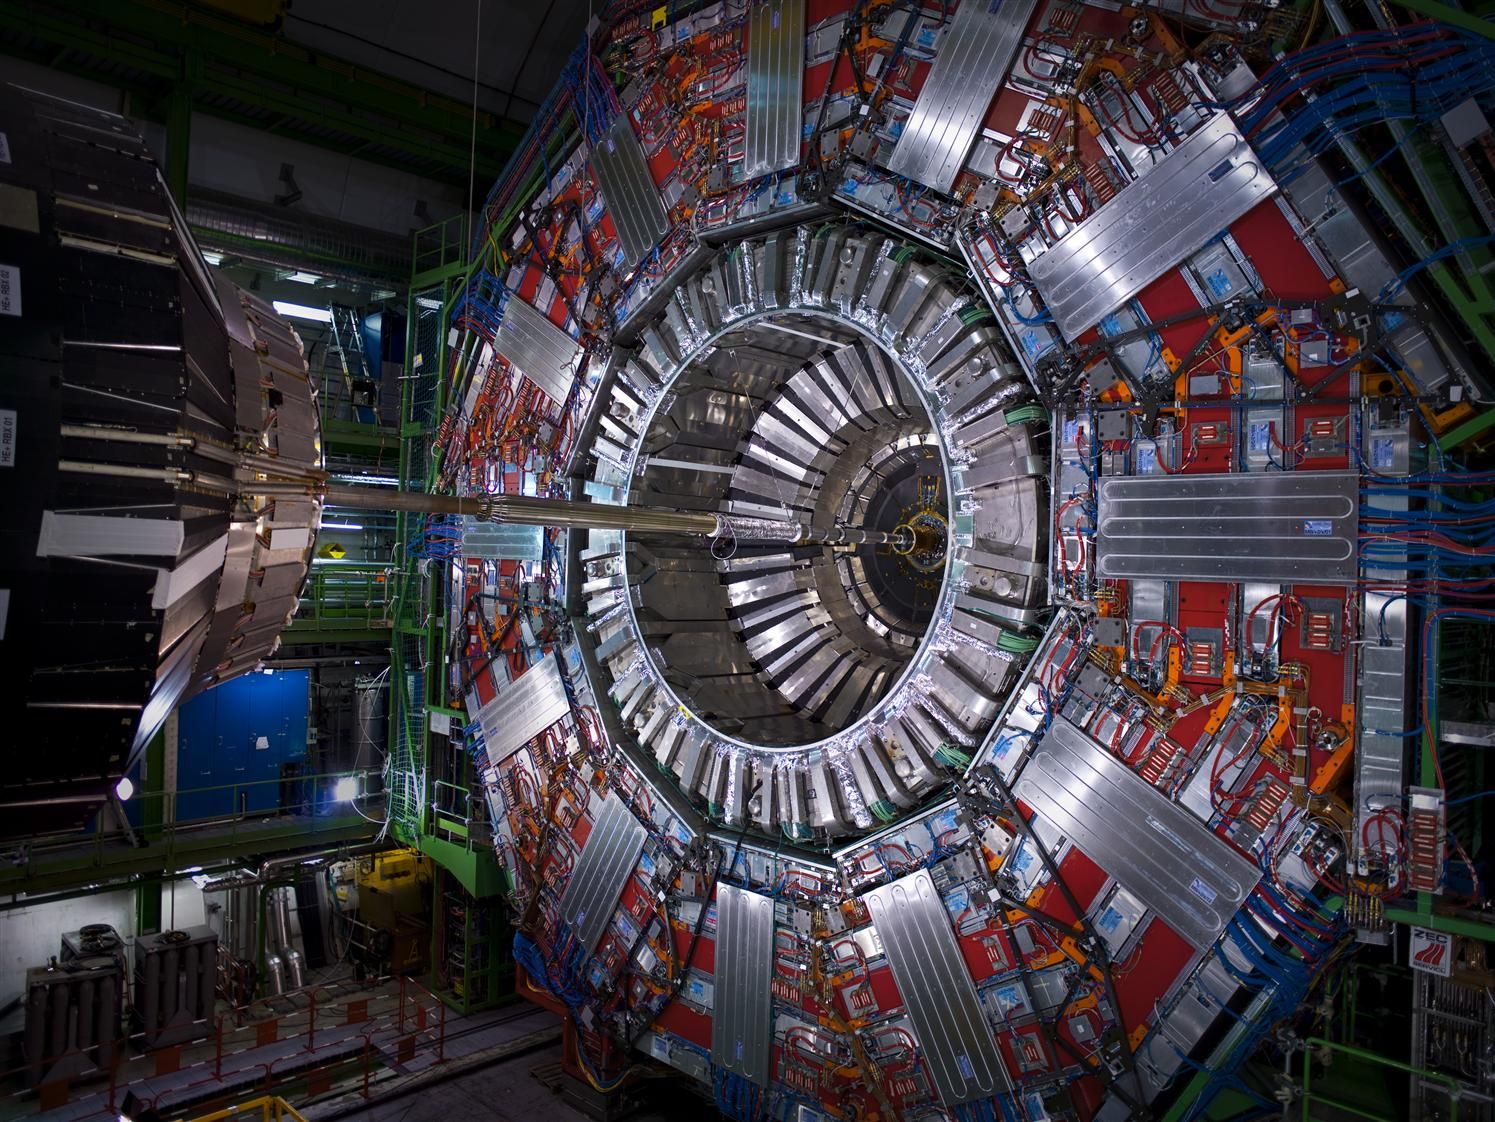 New experiment on CERN (European Organization for Nuclear Research) opened the possibility of the existence of multiverses, despite being a reasonable possibility